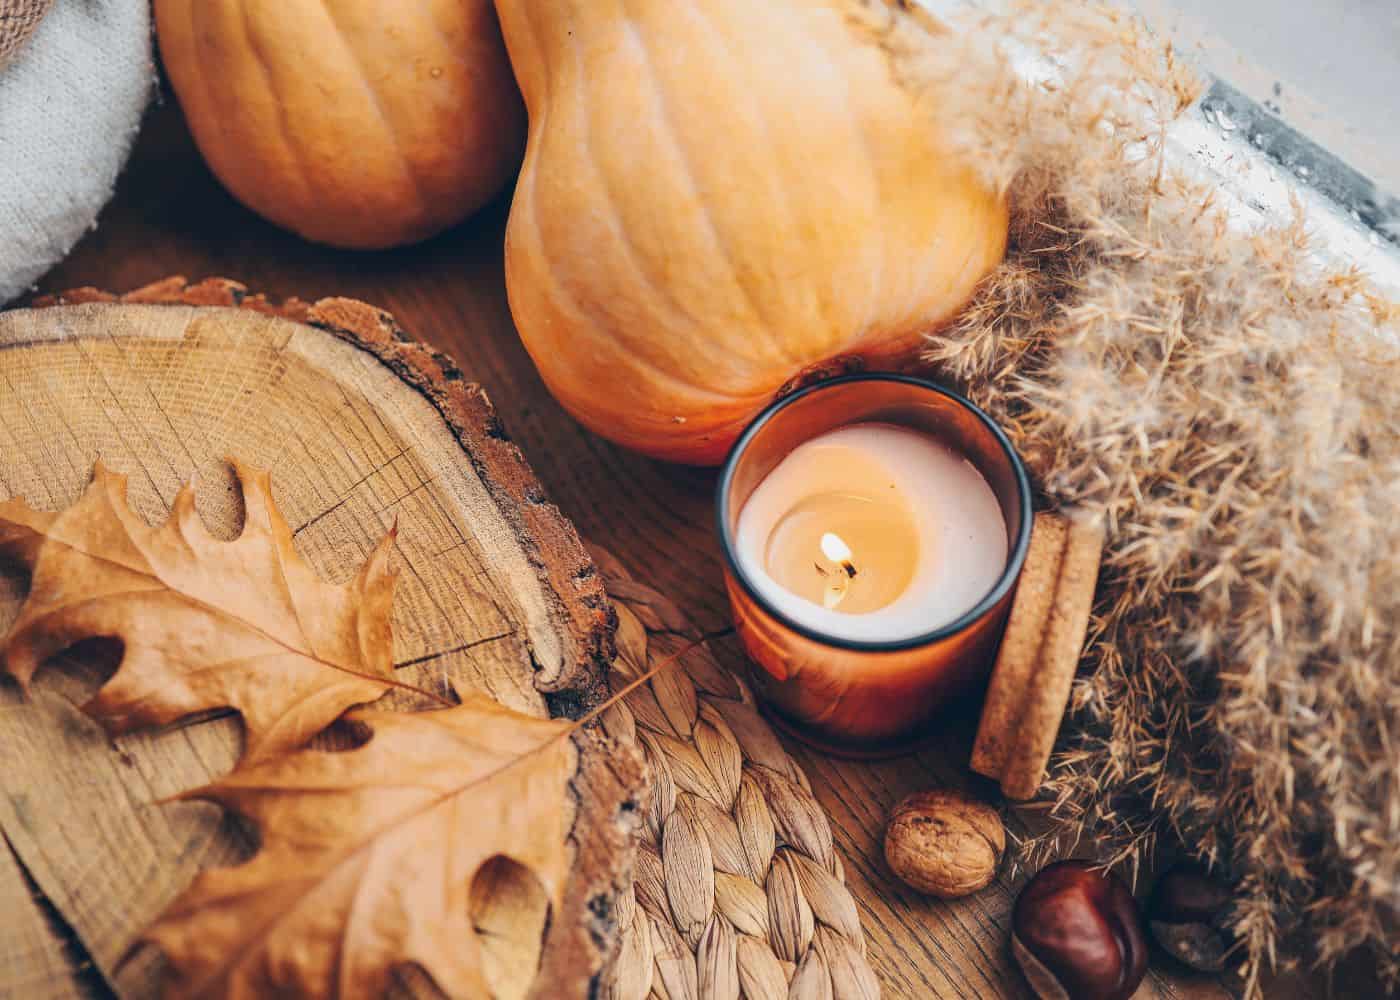 Candles, gourds, oak leaves